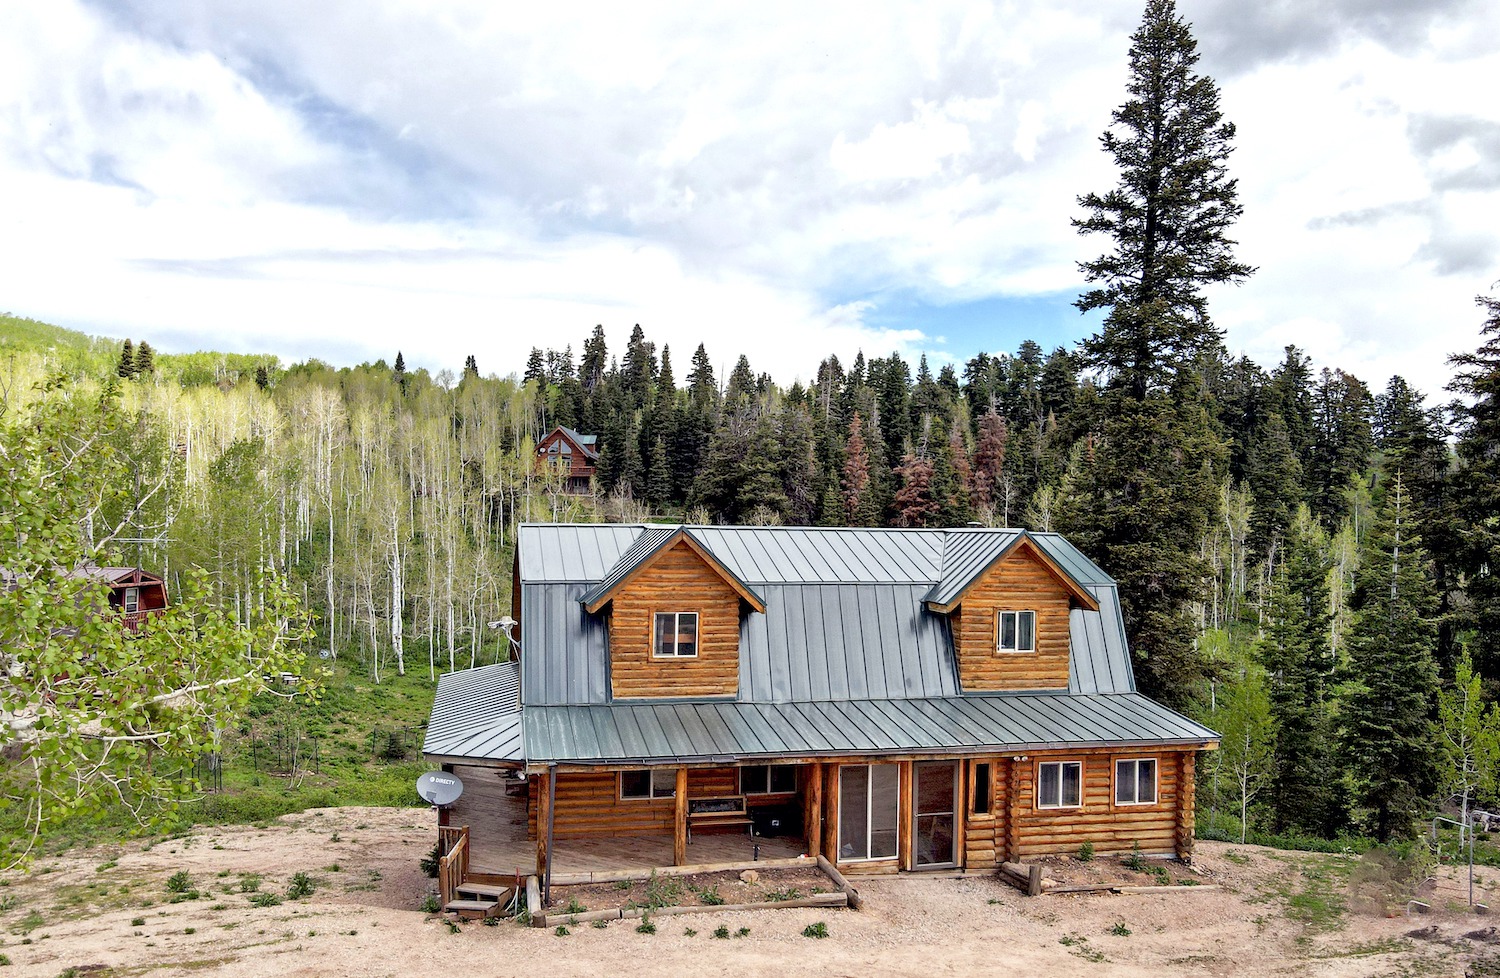 Looking for that cabin getaway? Check out our newest listing!